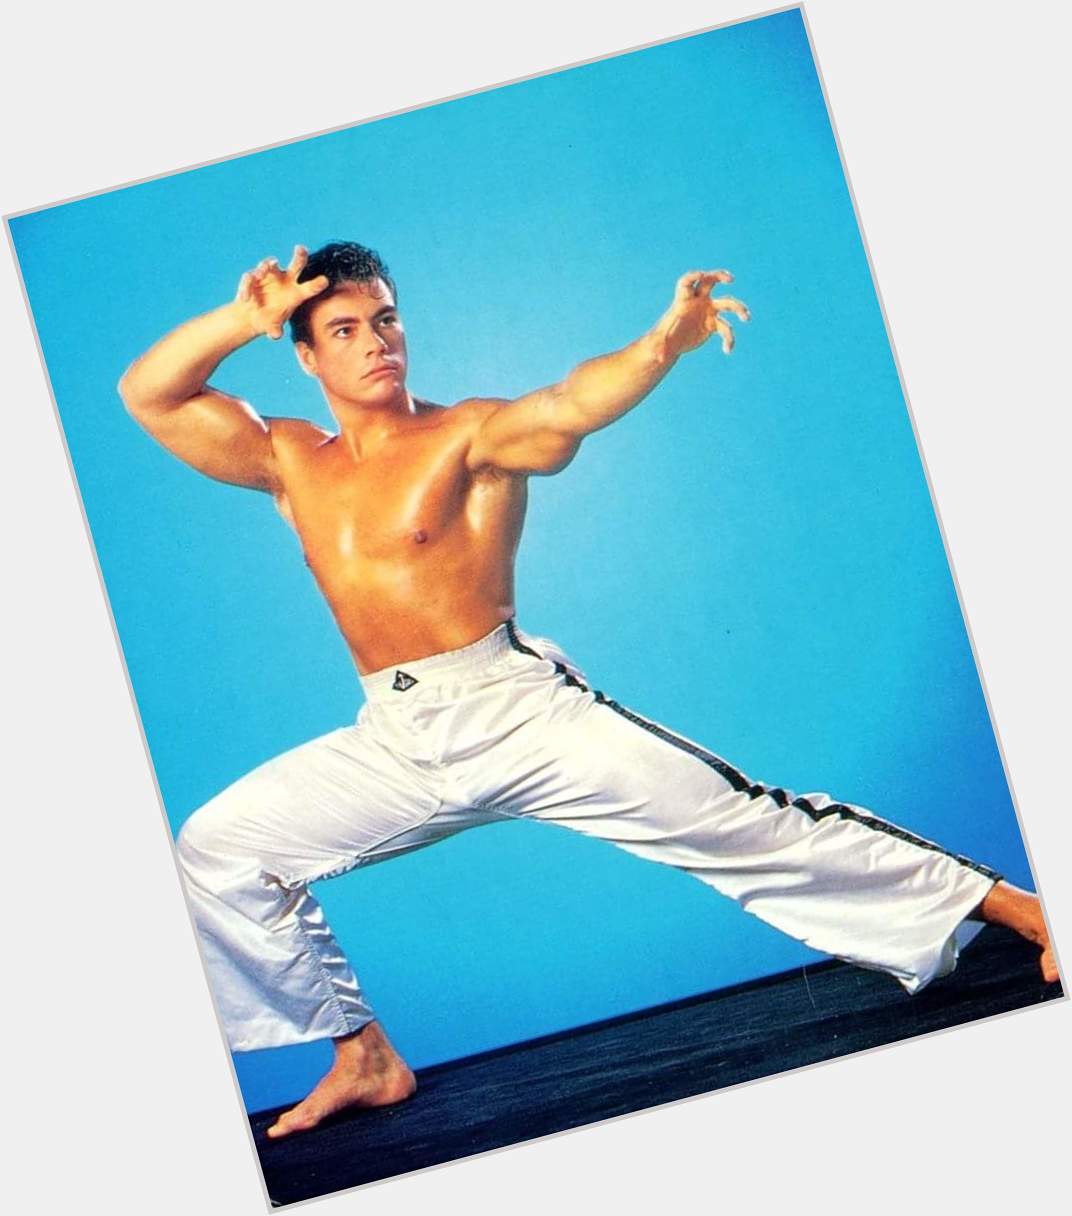 Happy Birthday to Jean-Claude Van Damme who turns 62 today! 